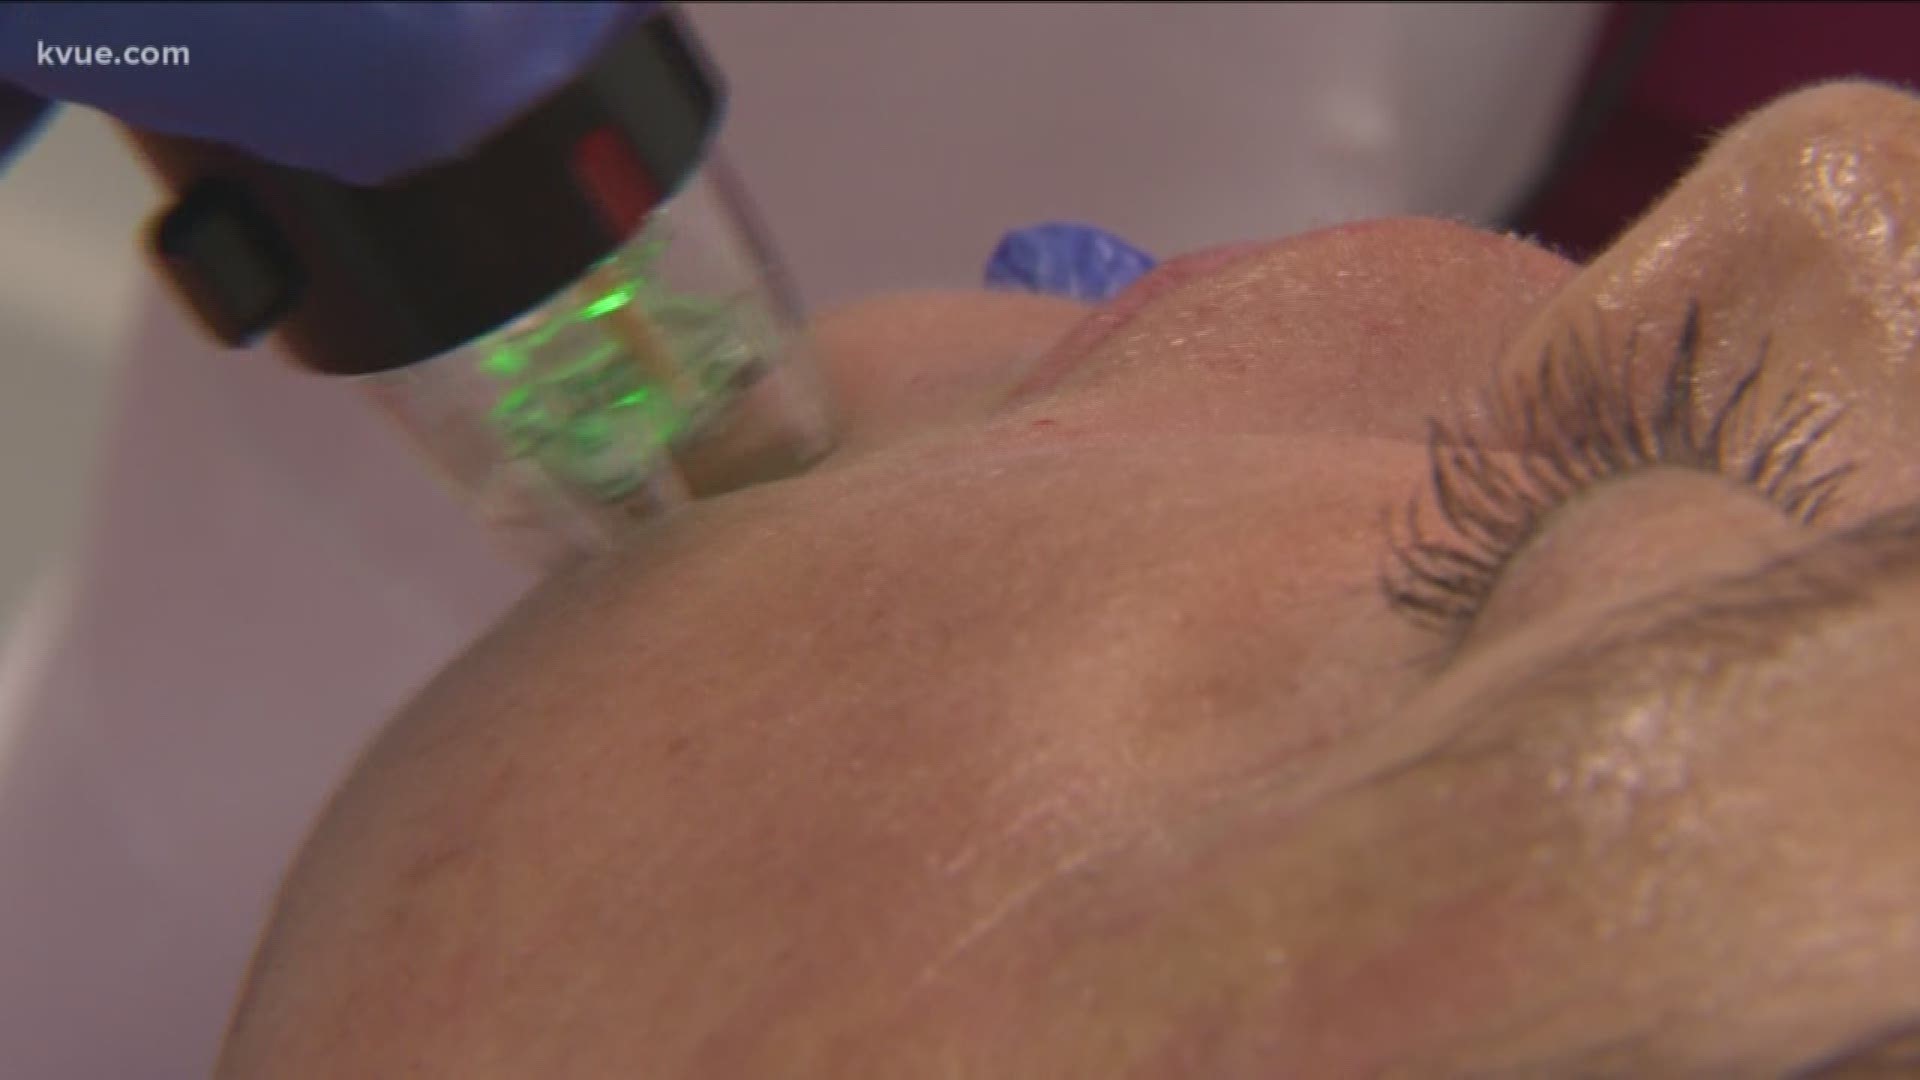 Dermatologists say a new machine can help reduce wrinkles, stretch marks and scars in as little as three weeks by combining micro-needling, radiofrequency and a redefined technology.